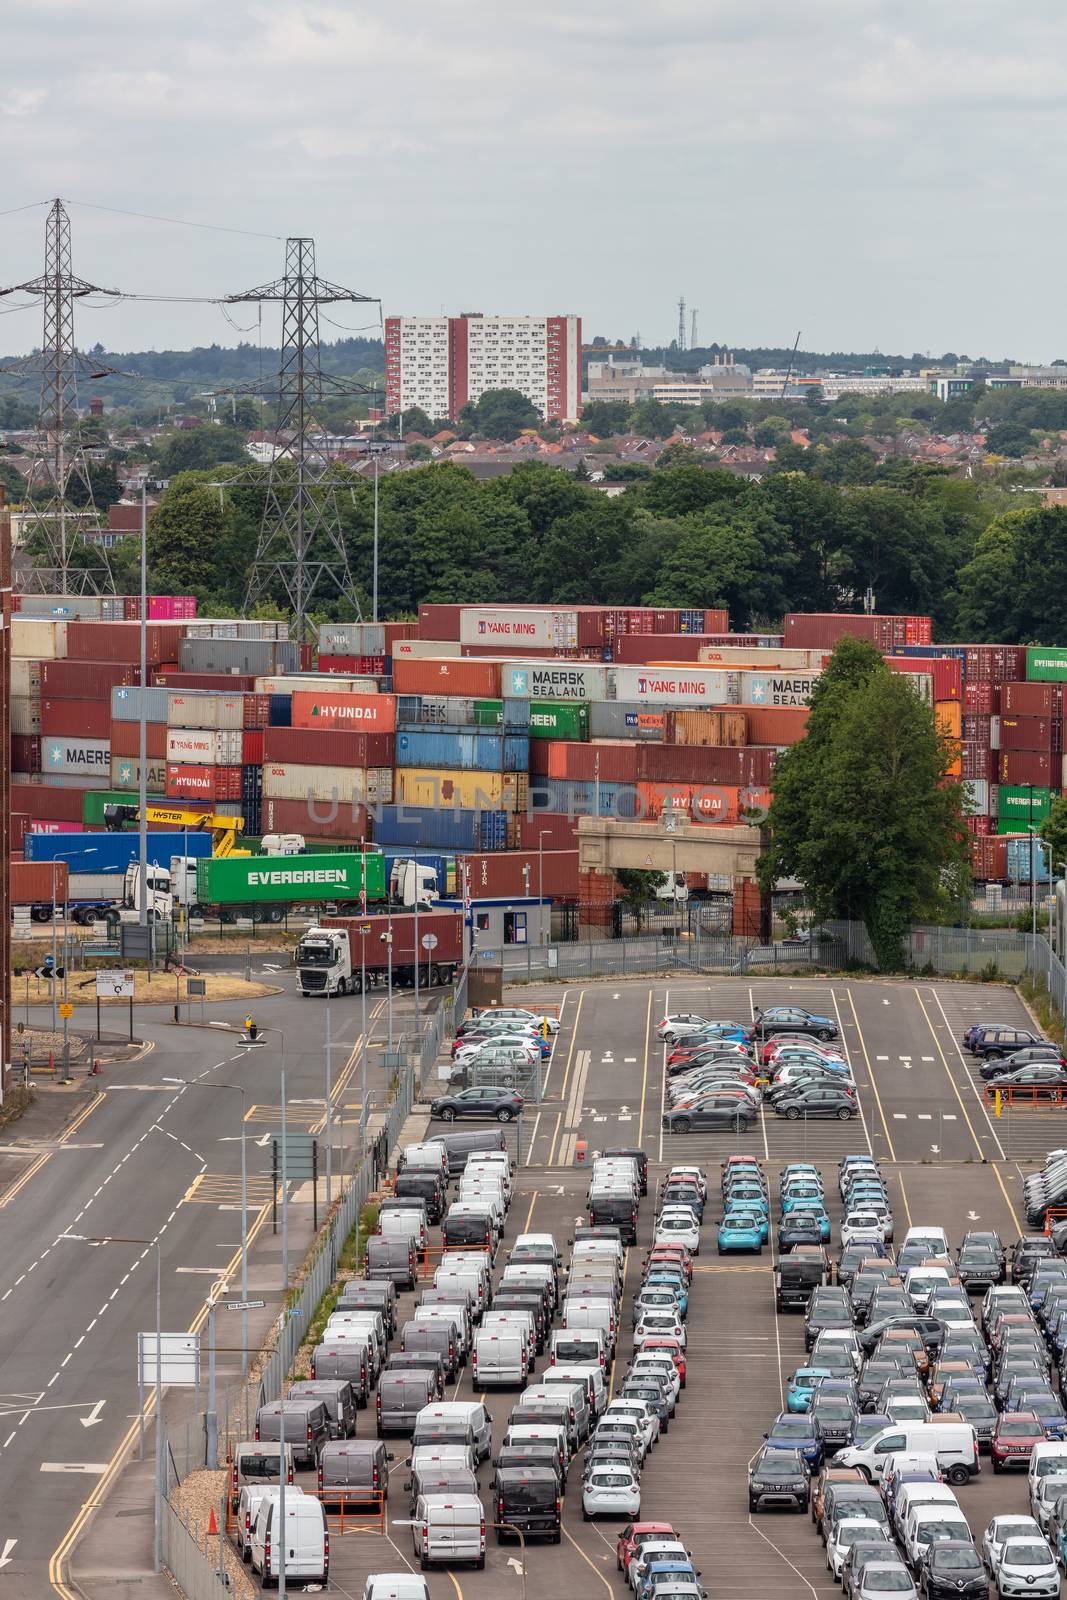 Parking lot full of cars in the port of Southampton. by DamantisZ